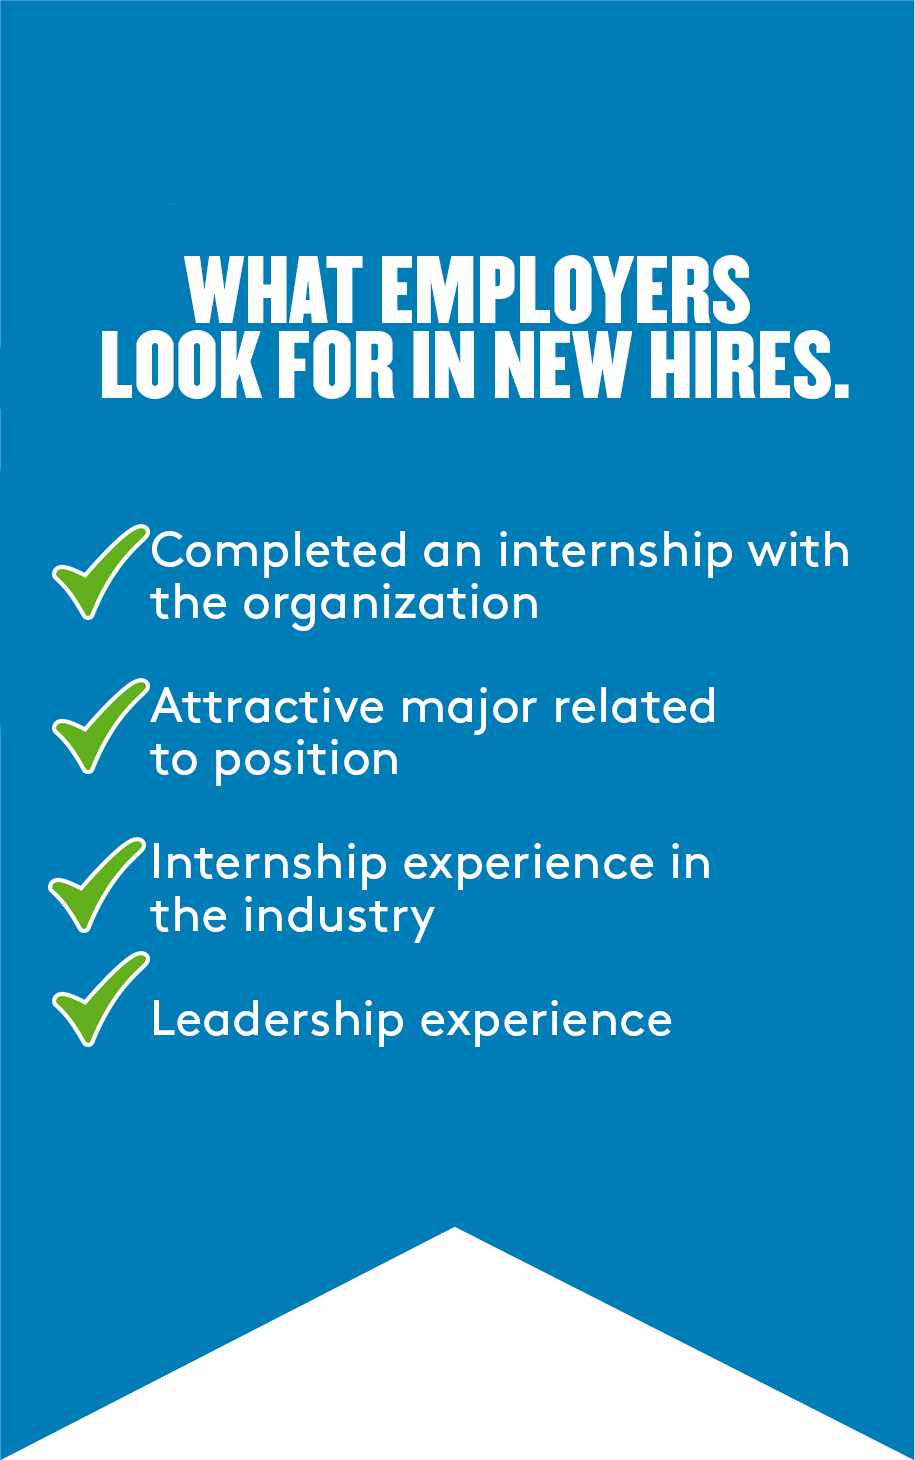 What employers look for in new hires